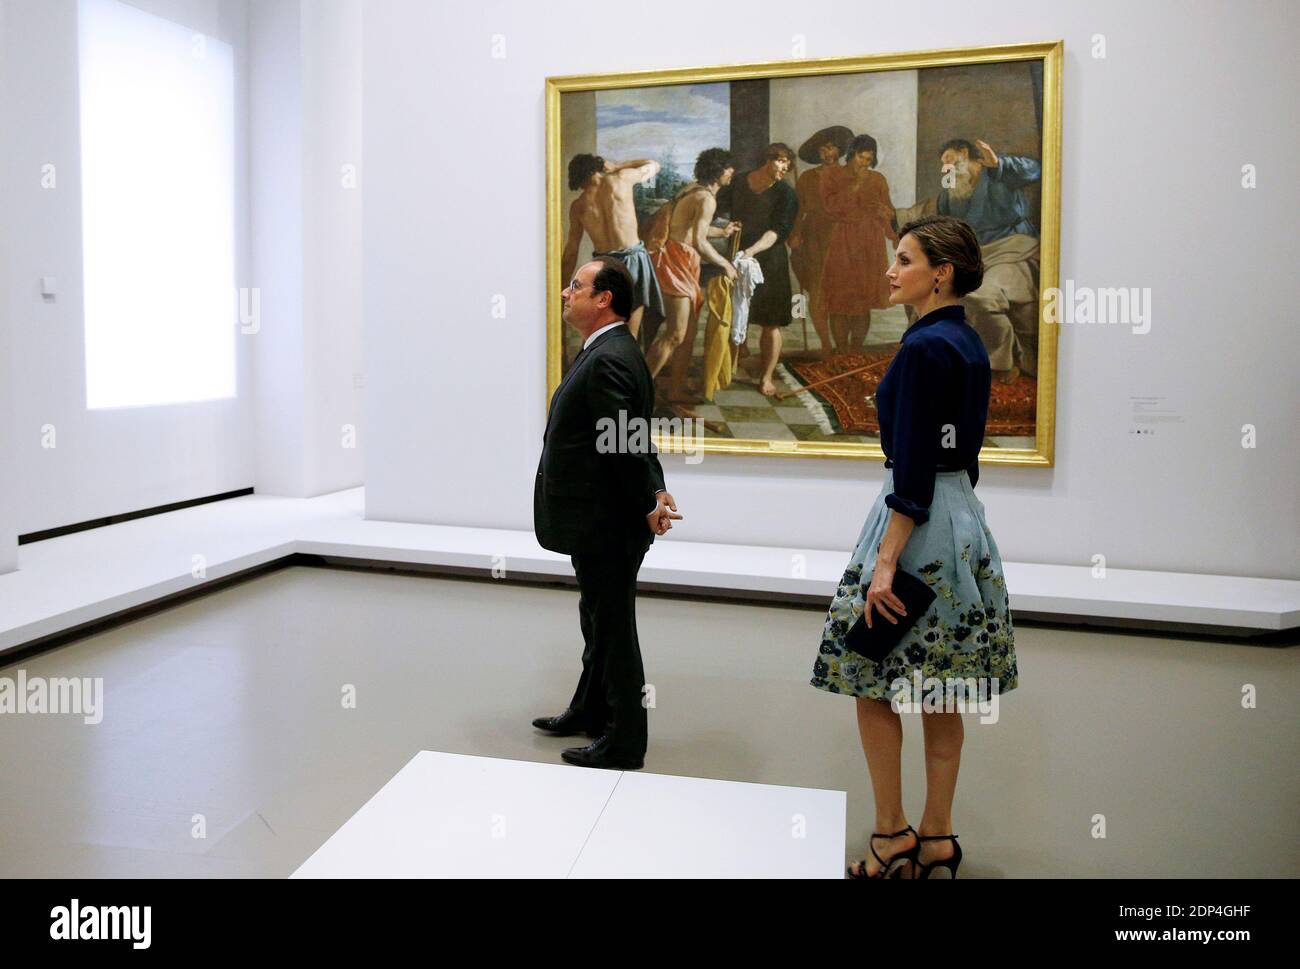 French President Francois Hollande and Queen Letizia of Spain pass by the painting 'La Tunique de Joseph' (Joseph's bloody coat brought to Jacob) as they tour the exhibition 'Velasquez - The golden age of Spanish art' at Grand Palais in Paris, France on June 2, 2015. Photo by Yoan Valat/Pool/ABACAPRESS.COM Stock Photo